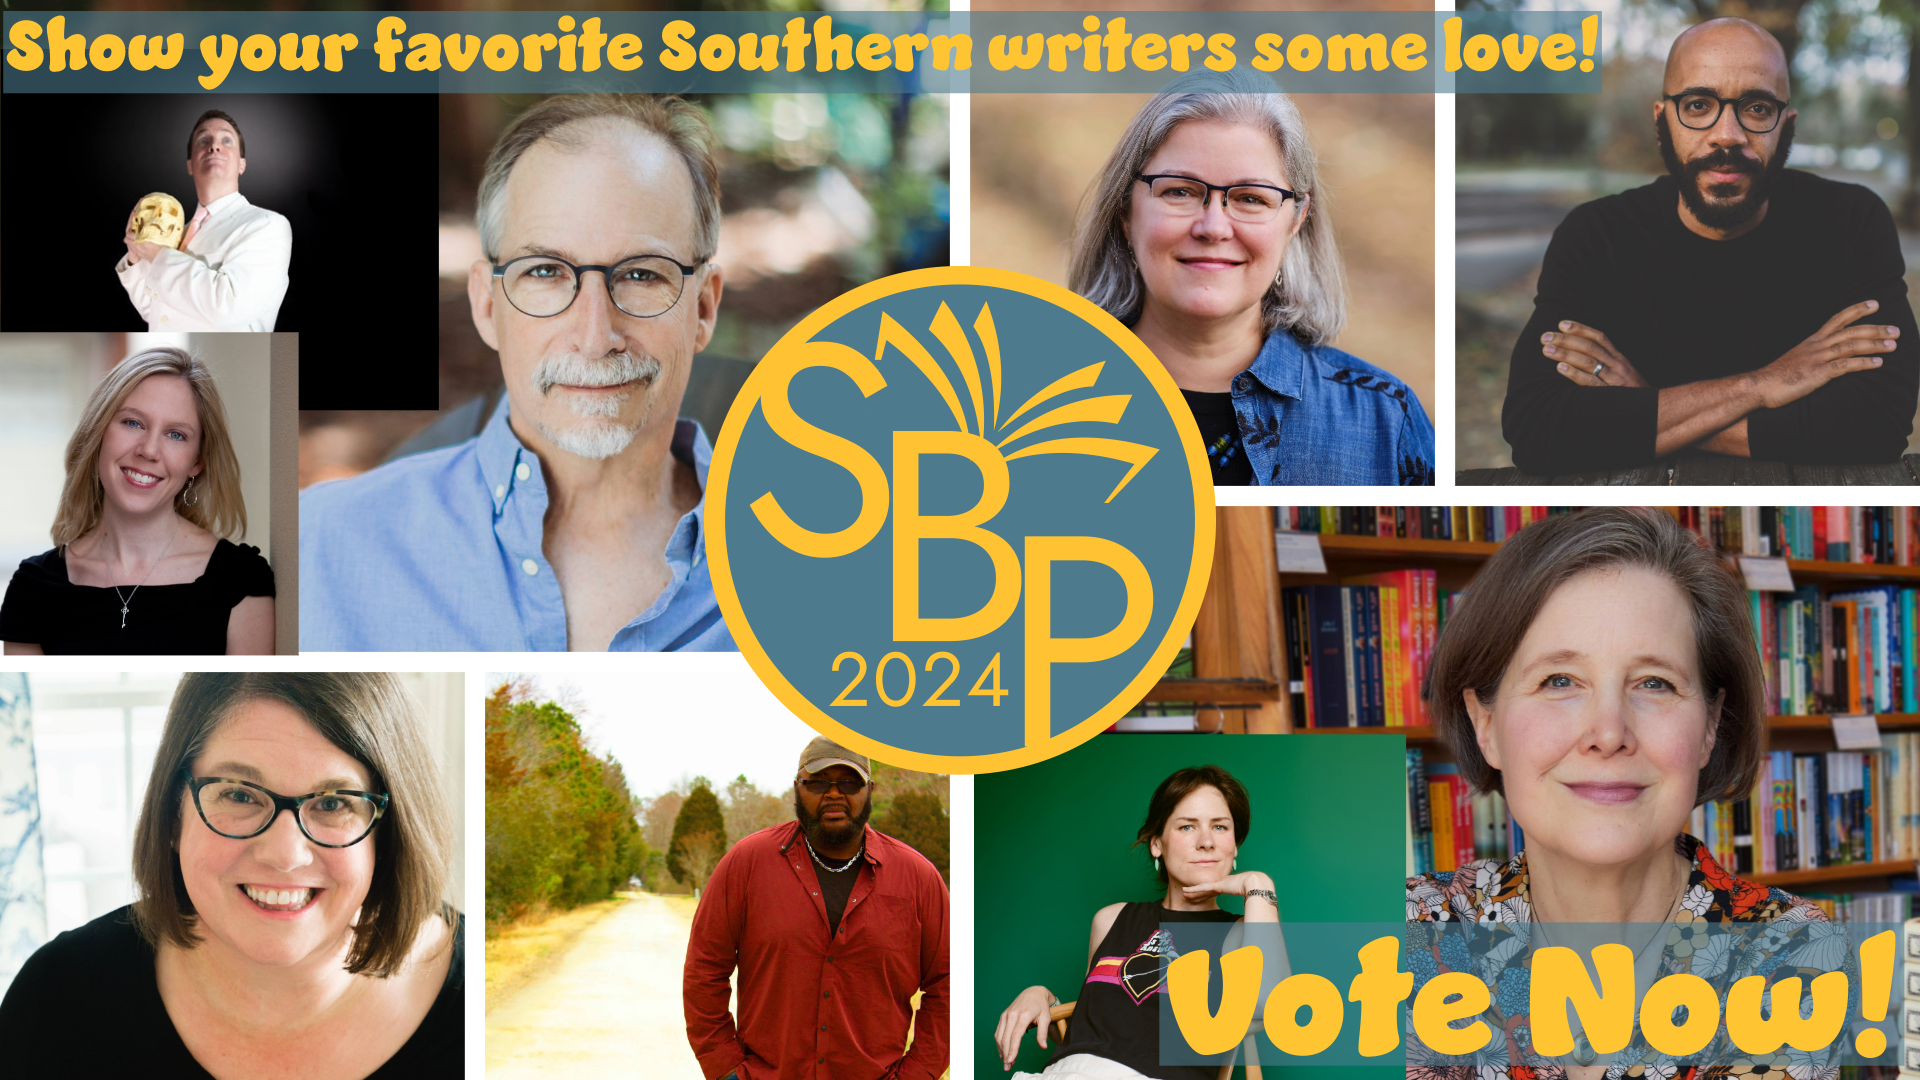 Show your favorite Southern writers some love. Vote Now!